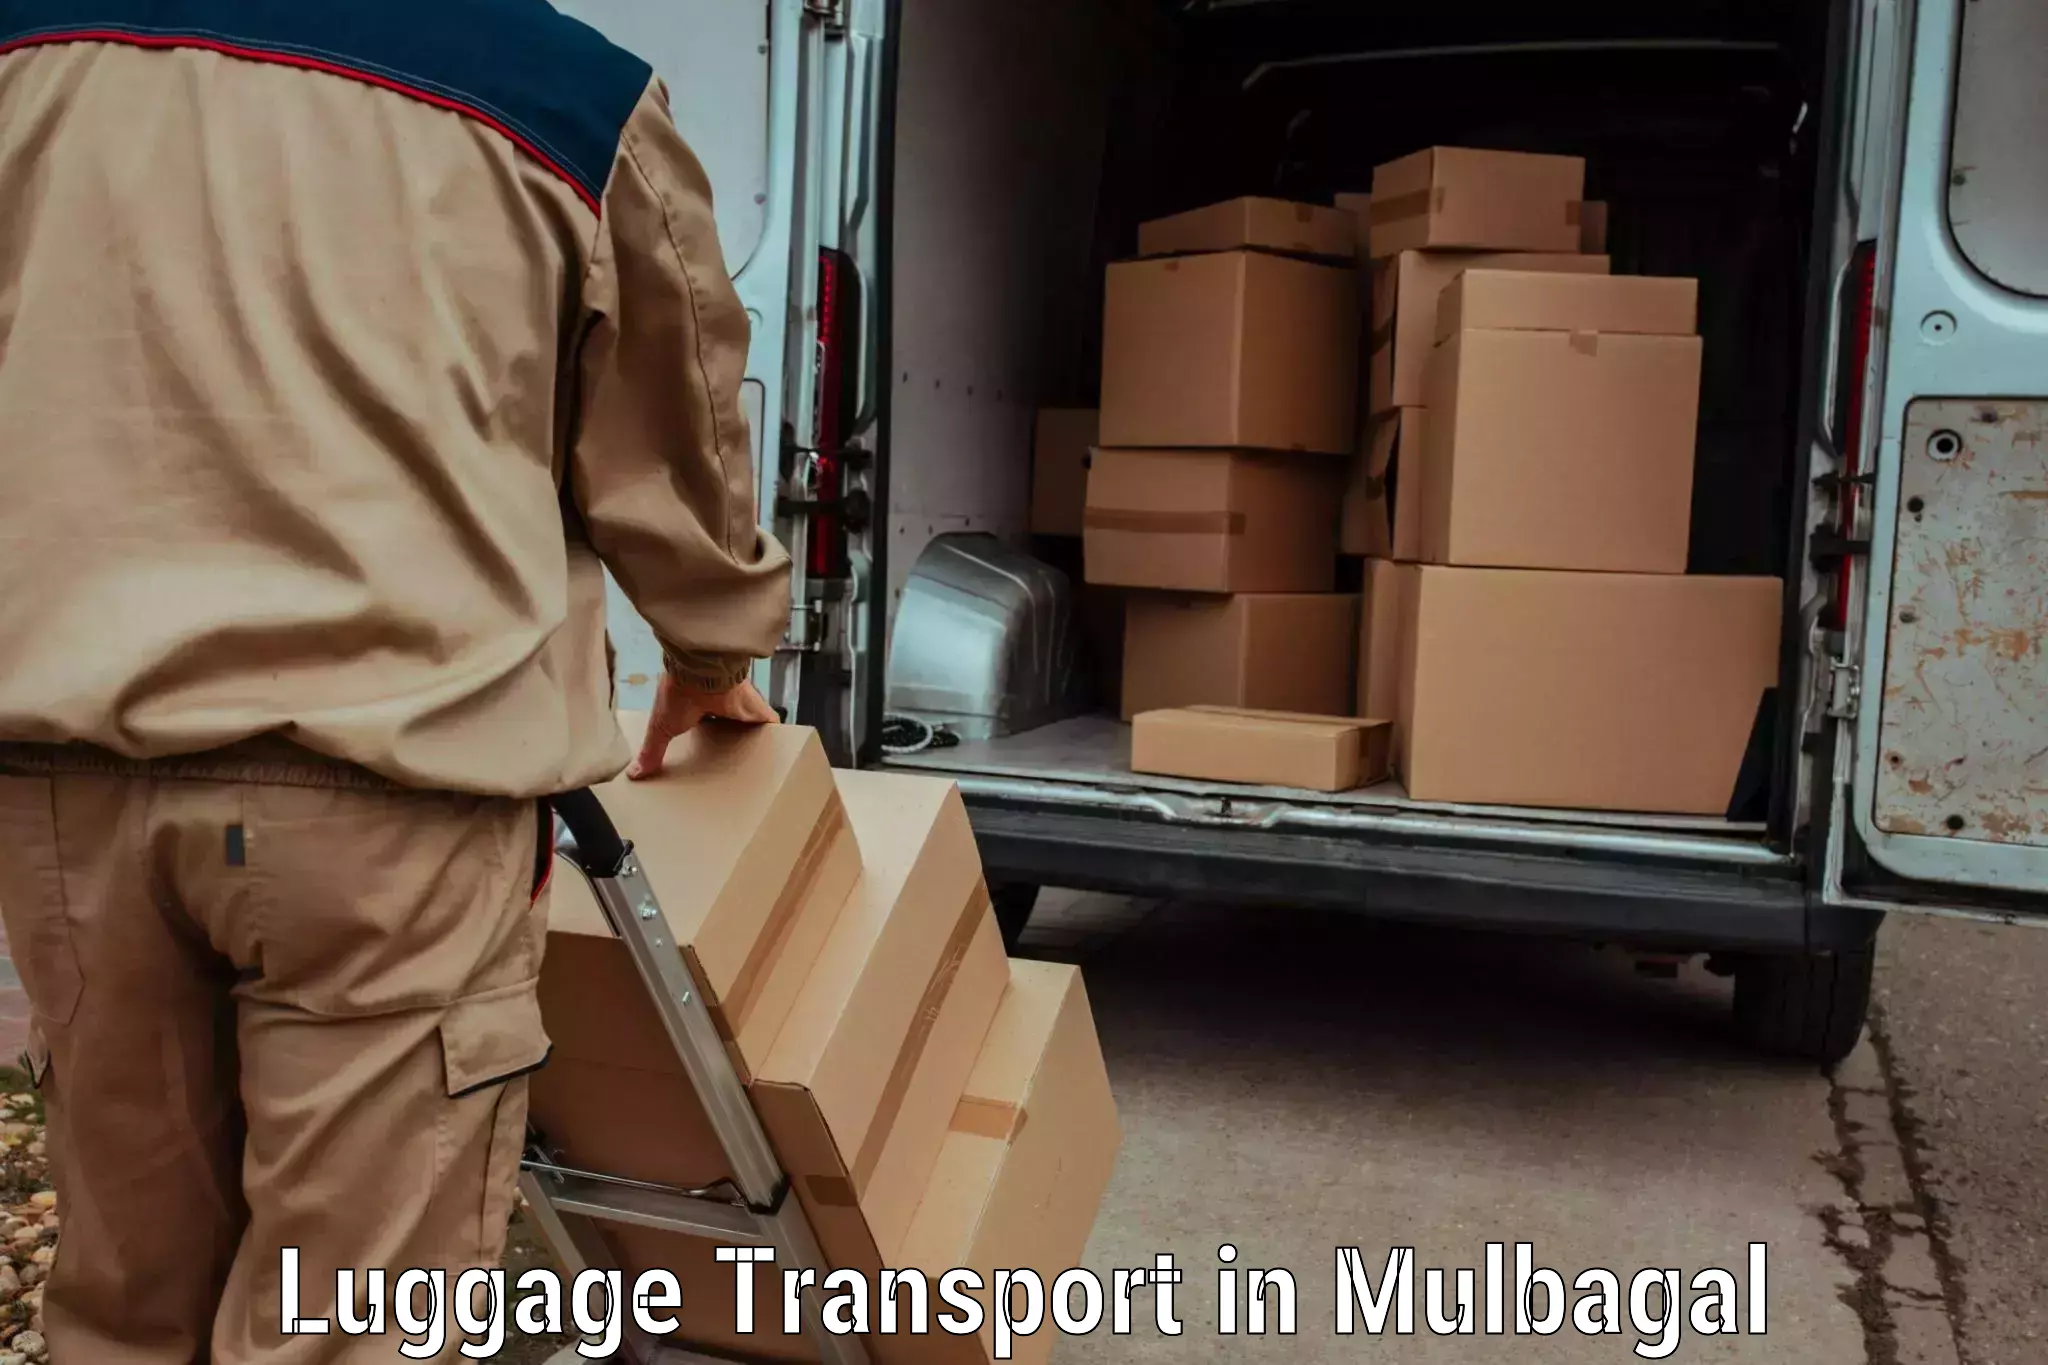 Urgent luggage shipment in Mulbagal